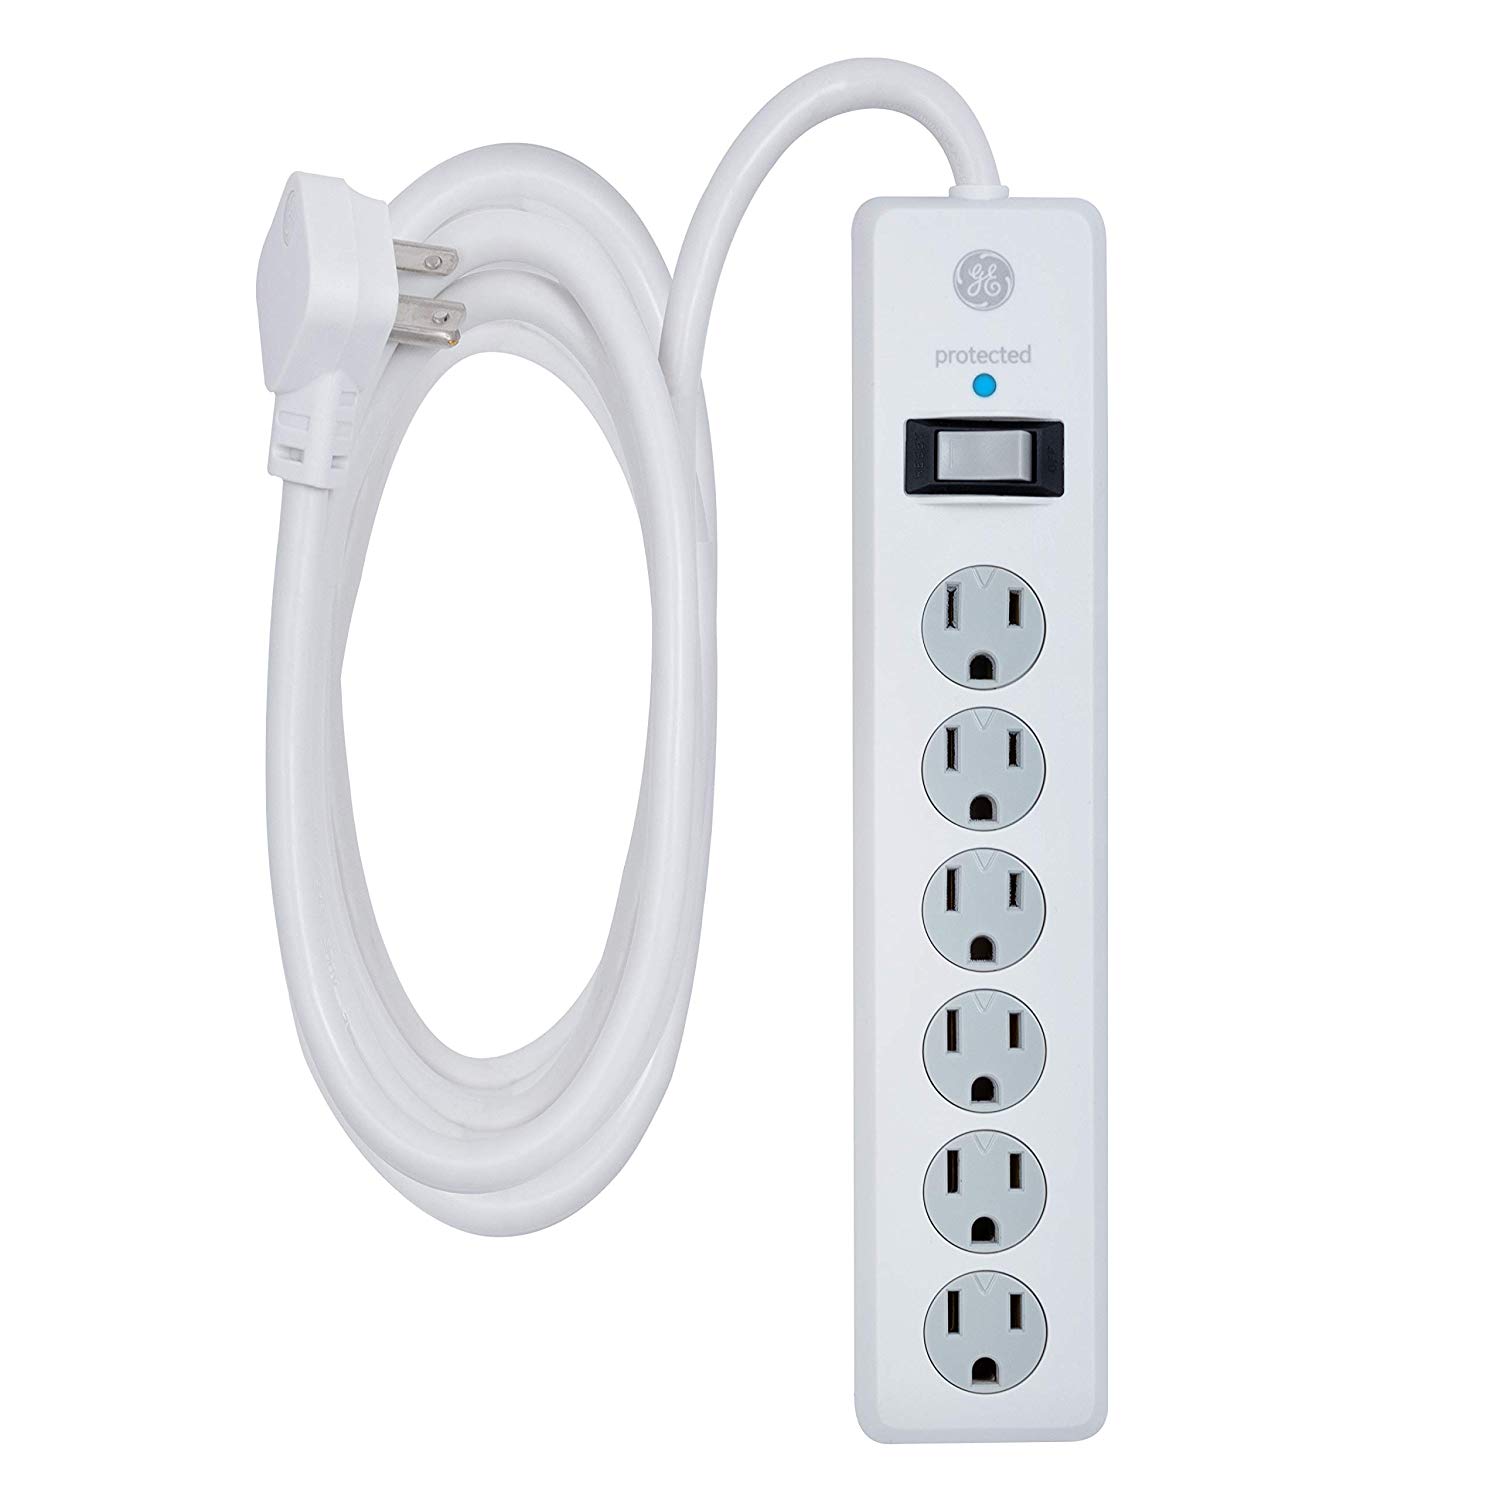 GE Twist-to-Close Safety Cover Surge Protector, 6-Outlet